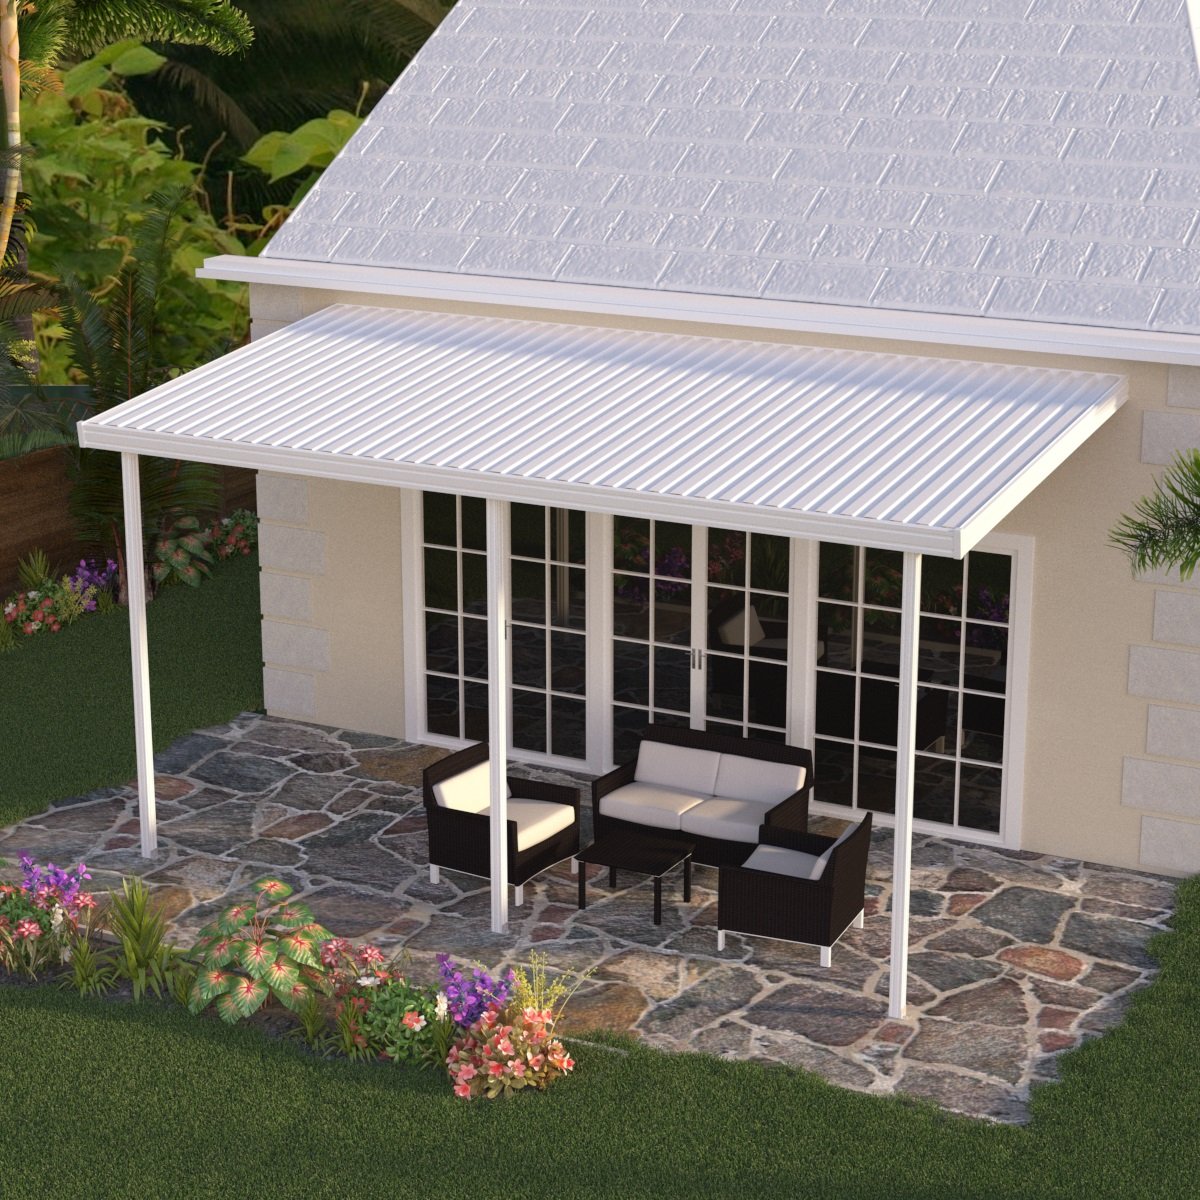 08 ft. Deep x 18 ft. Wide White Attached Aluminum Patio Cover -3 Posts - (10lb Low Snow Area)